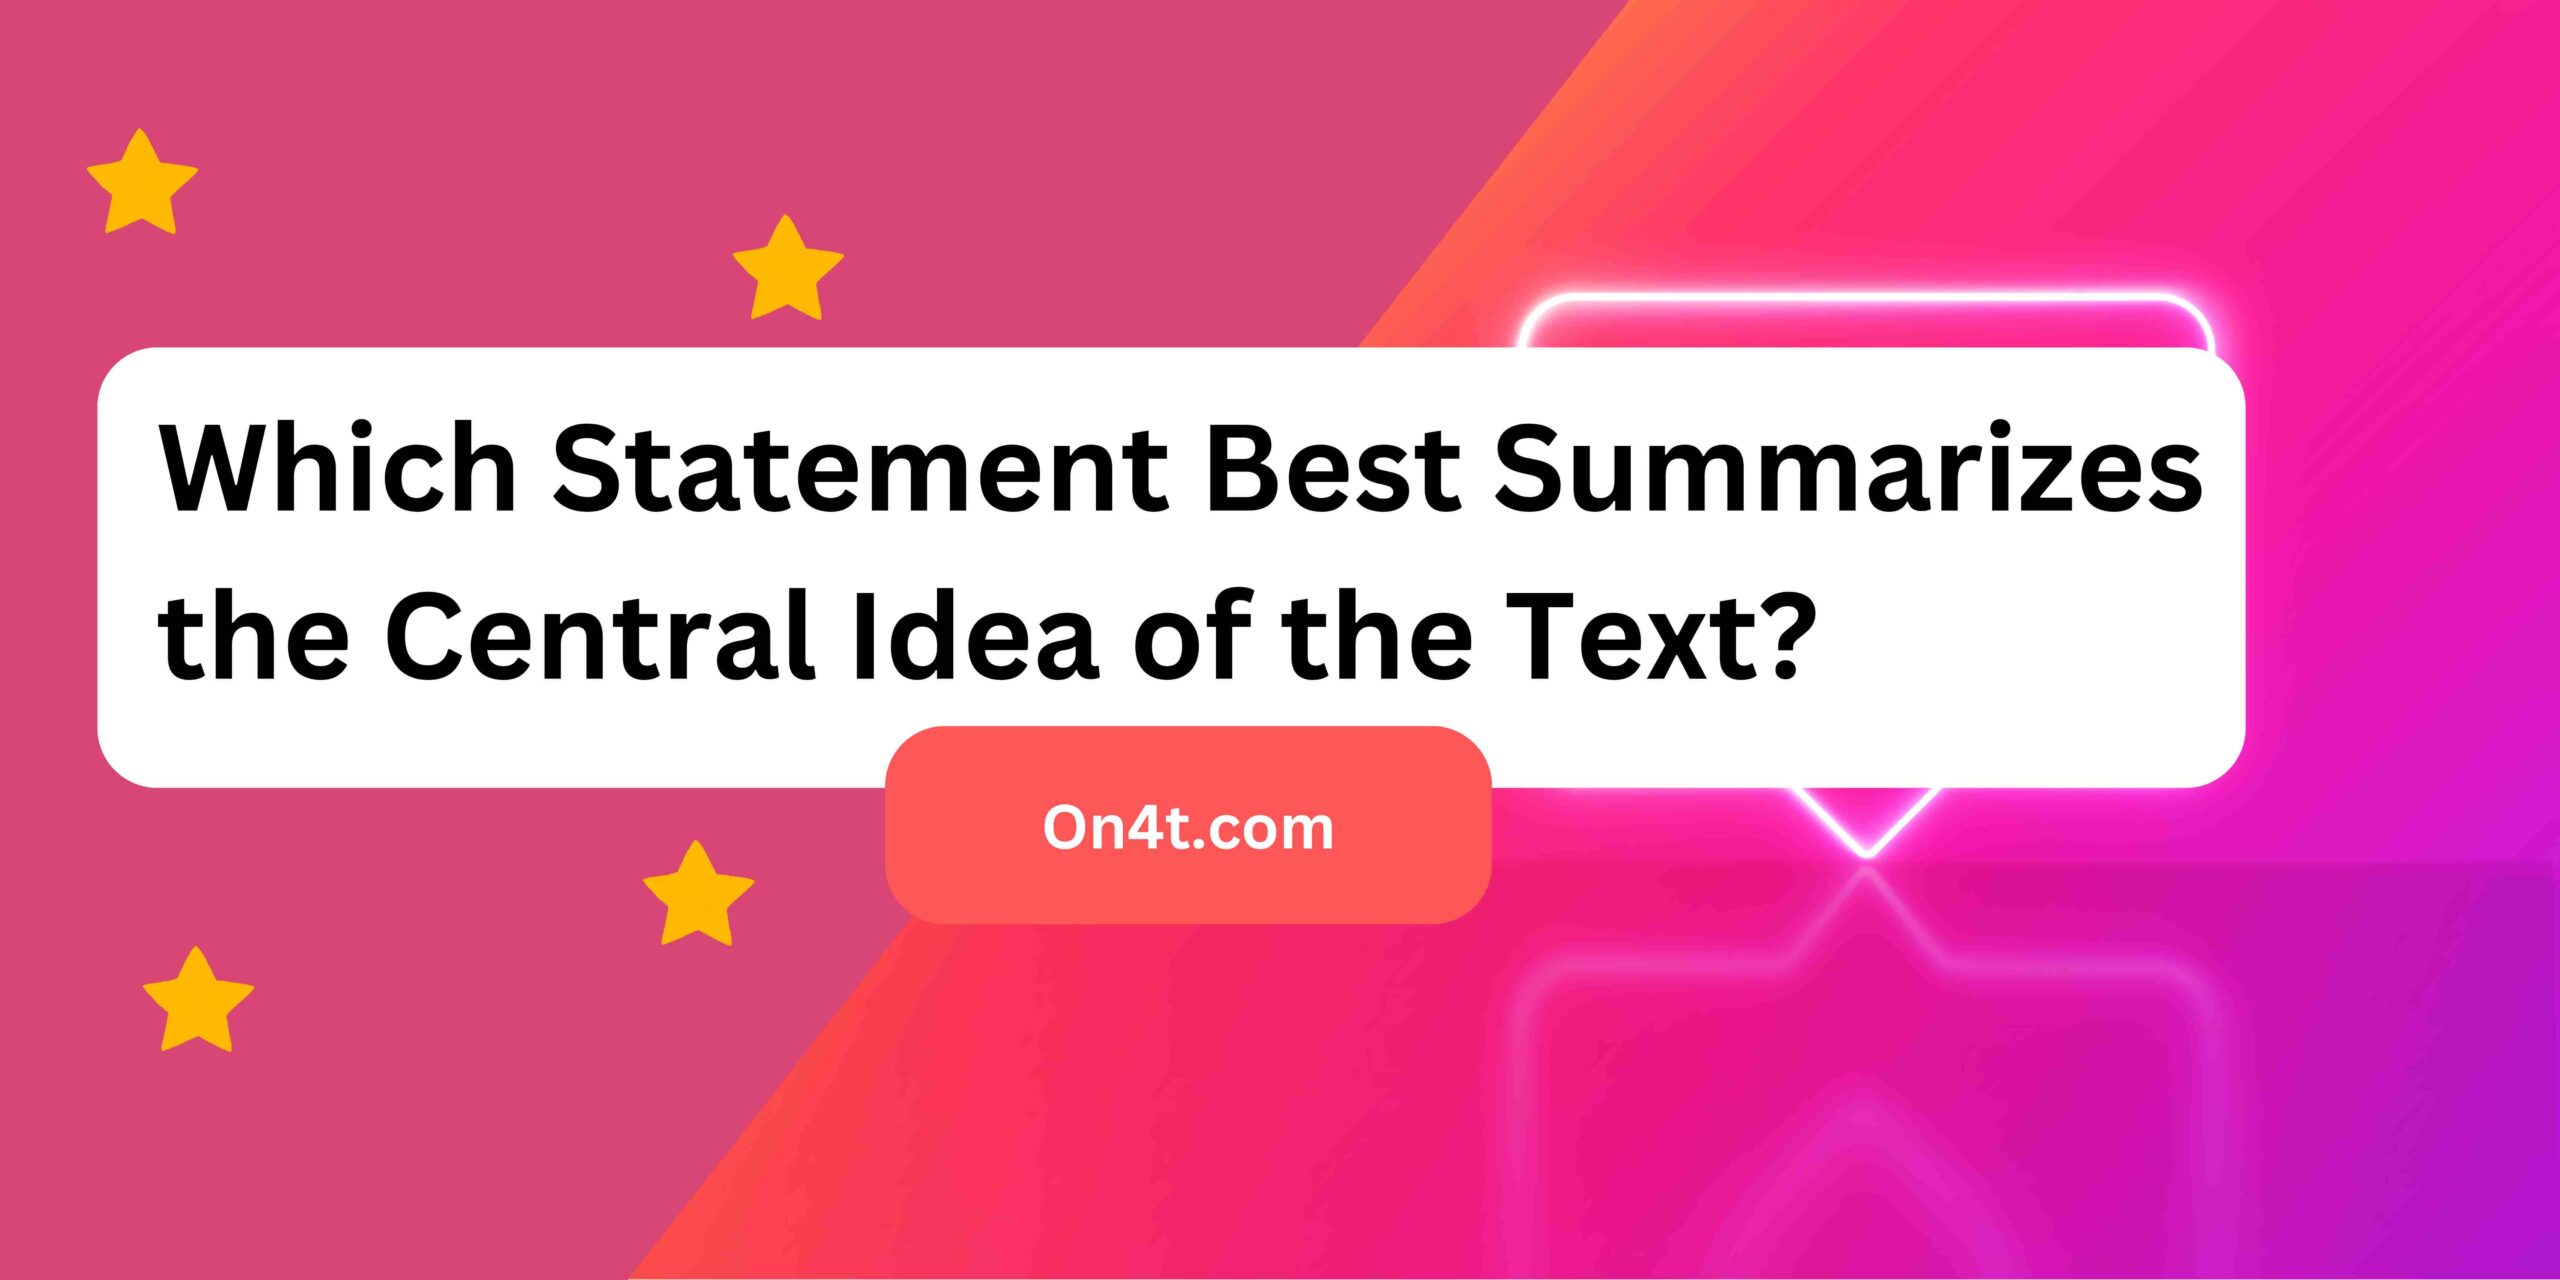 Which Statement Best Summarizes the Central Idea of the Text